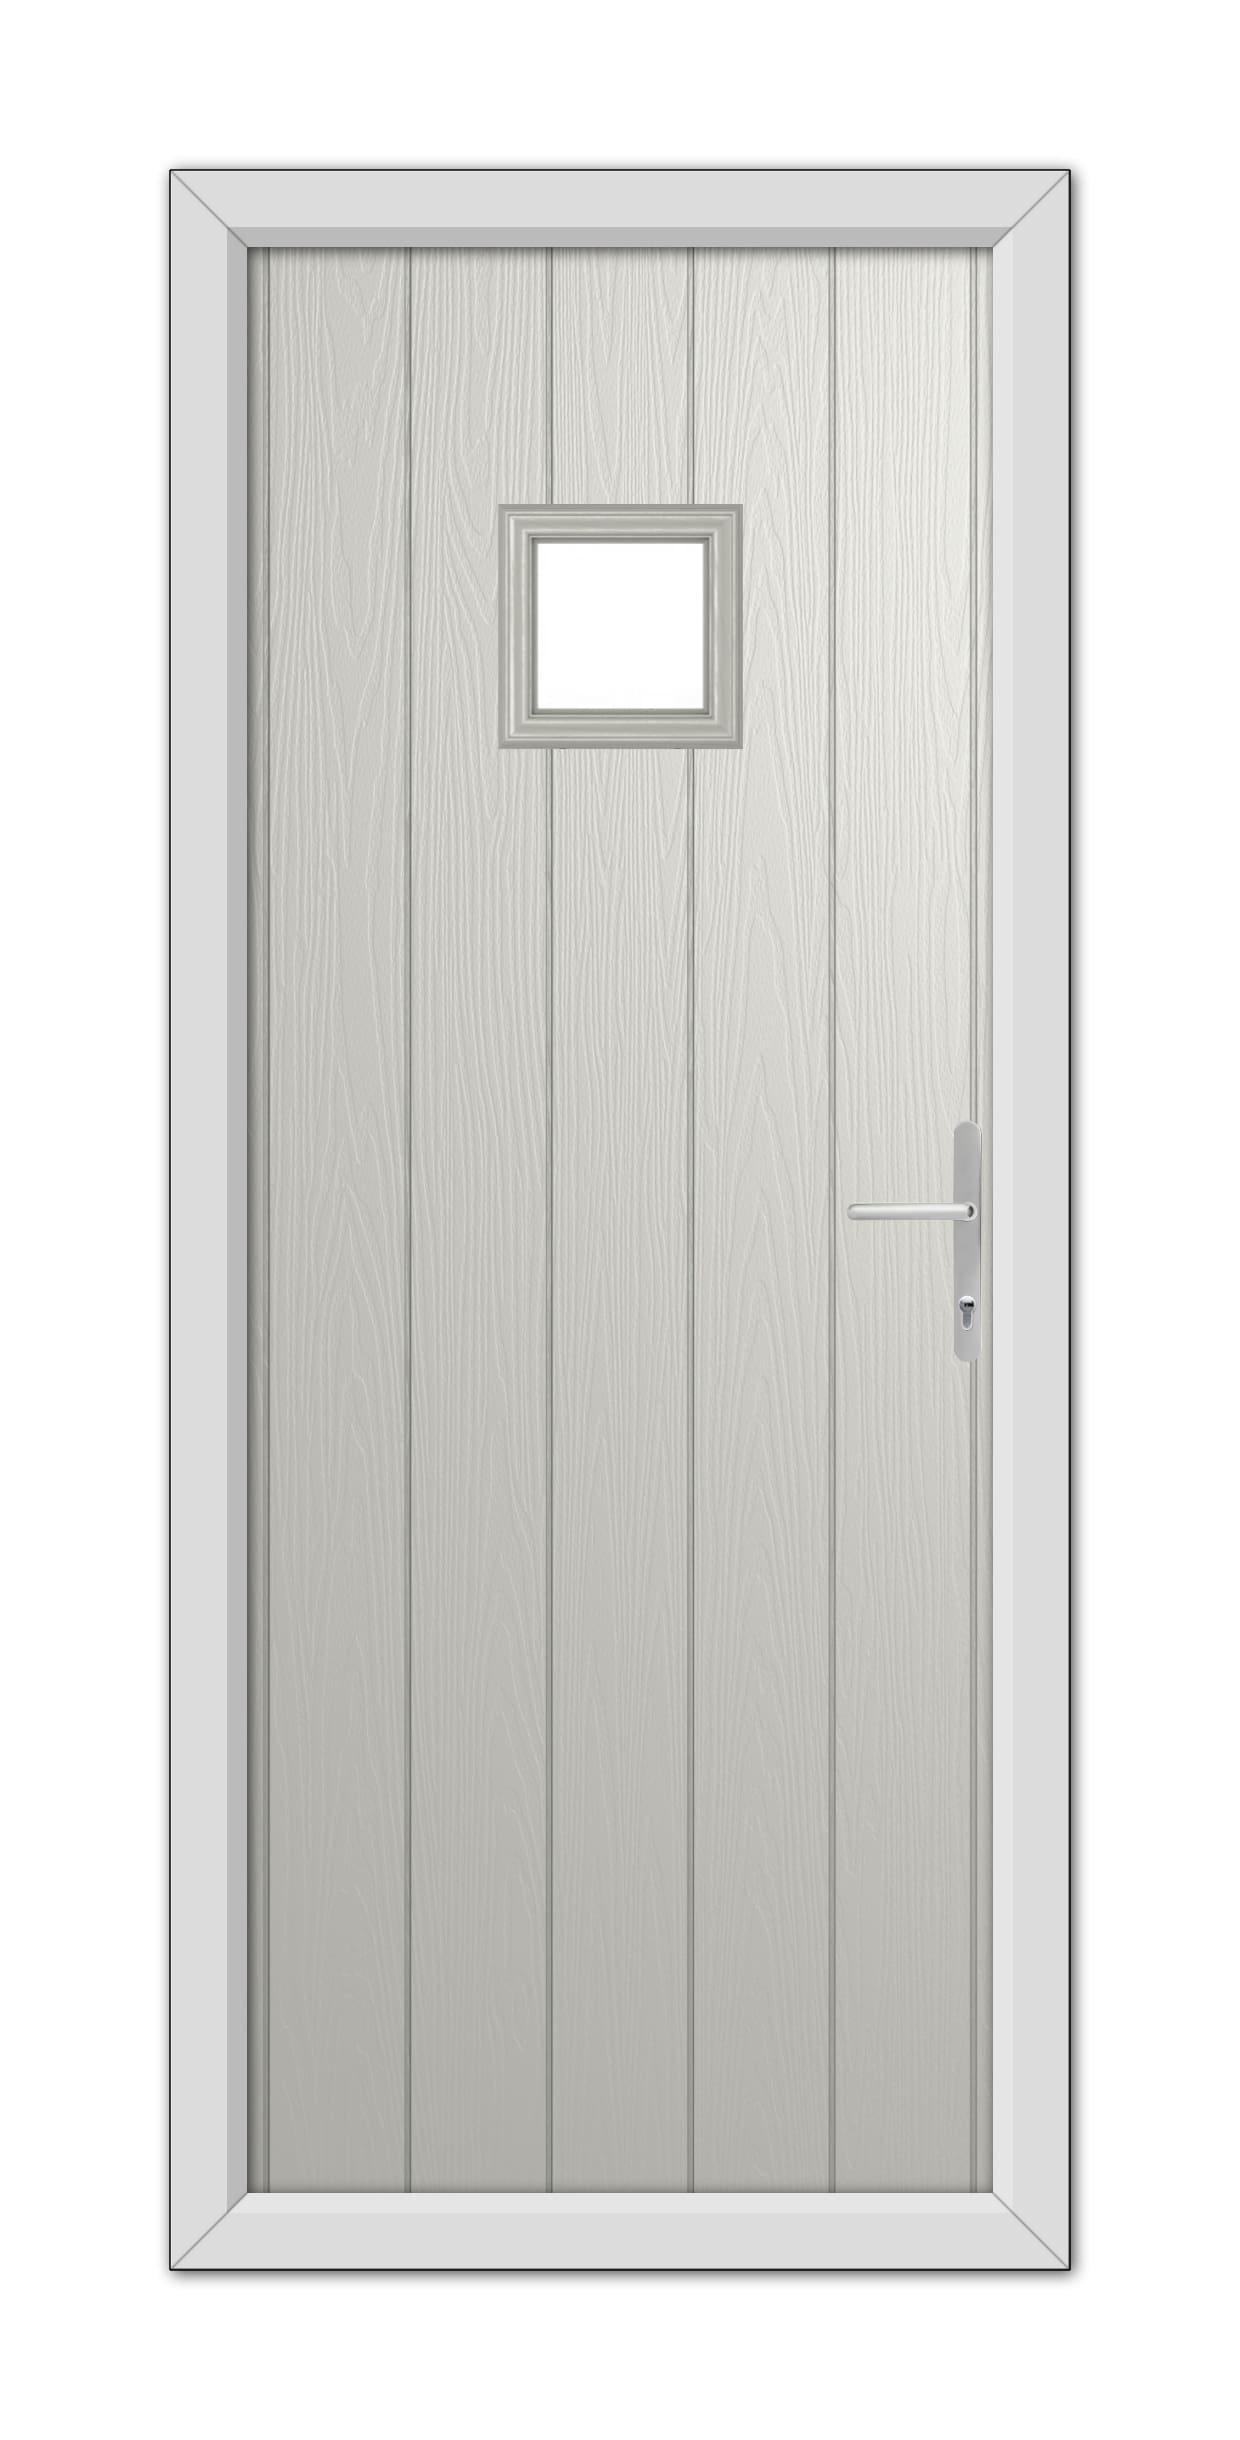 A modern Agate Grey Brampton Composite Door 48mm Timber Core with a small rectangular window and a metal handle, set within a white door frame.